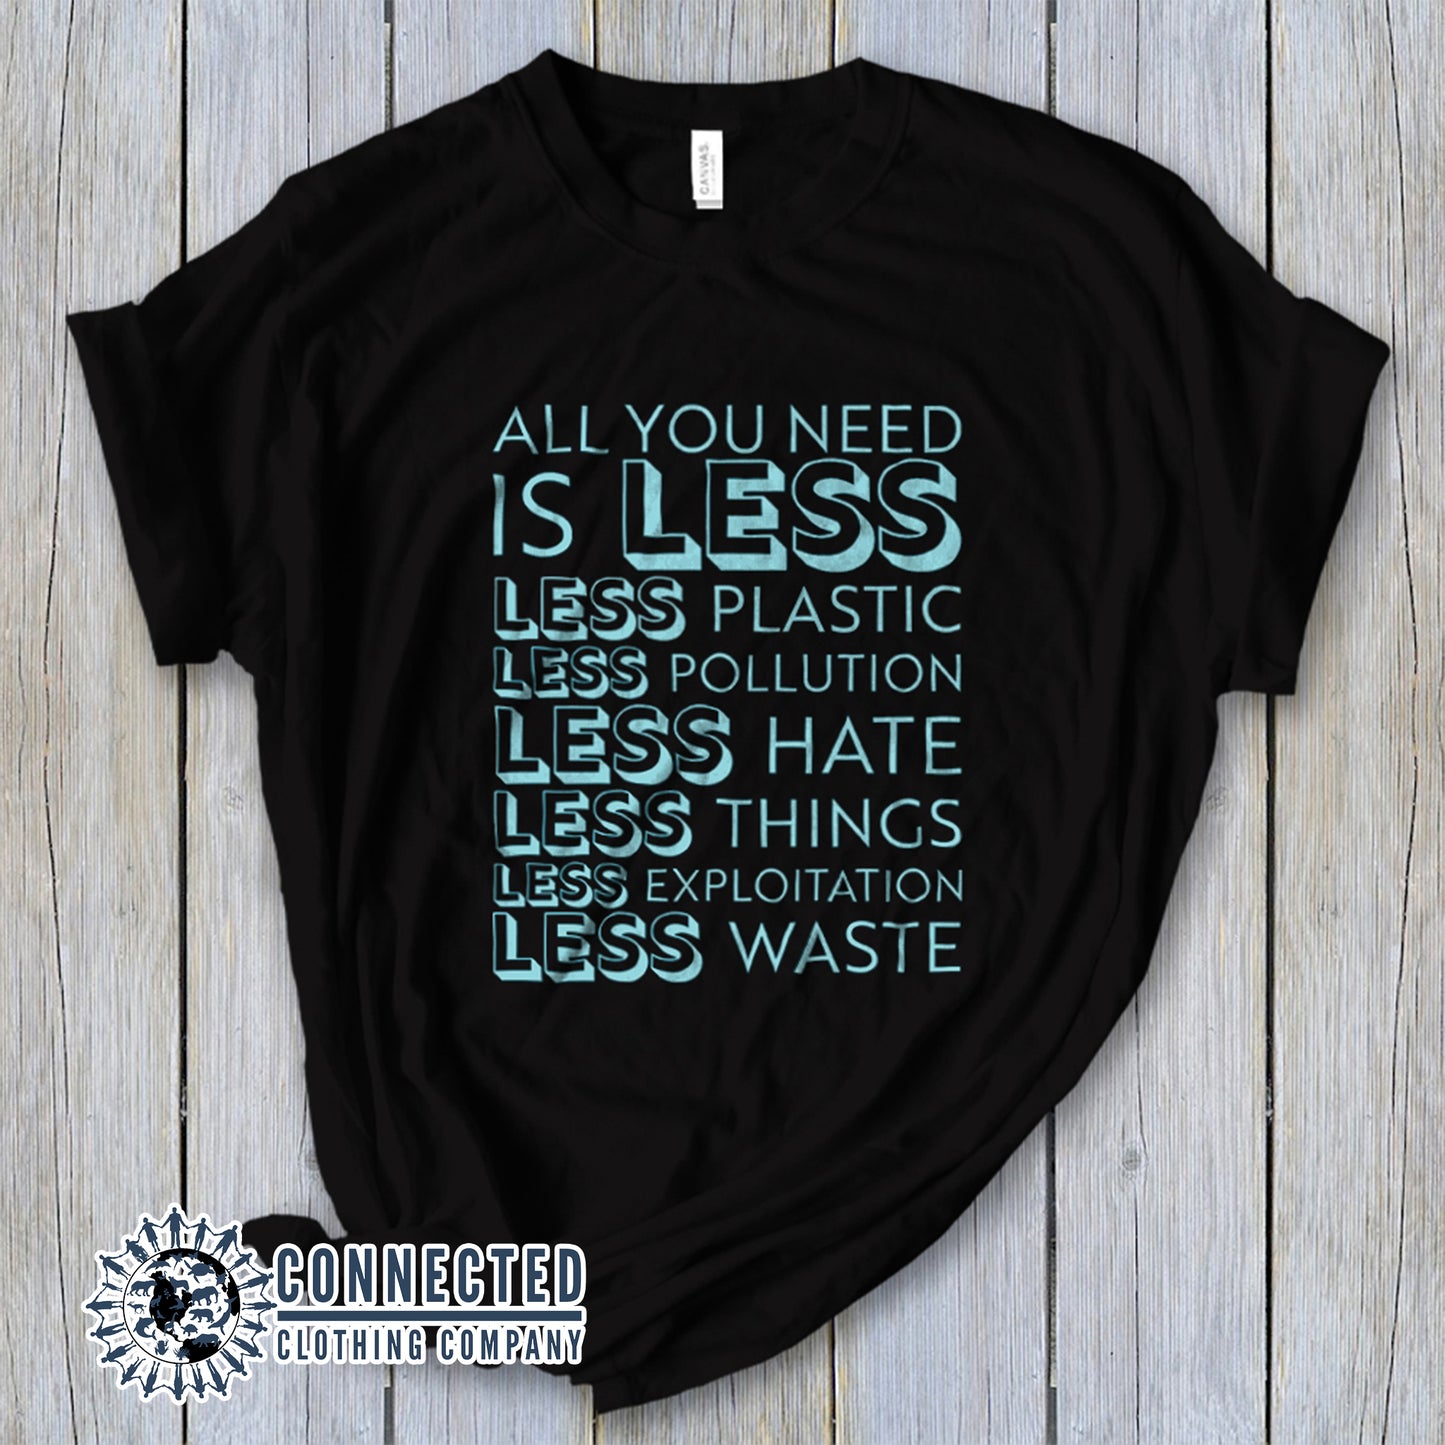 Black All You Need Is Less Short-Sleeve Unisex Tee reads "all you need is less. less plastic. less pollution. less hate. less things. less exploitation. less waste." - sweetsherriloudesigns - Ethically and Sustainably Made - 10% of profits donated to Mission Blue ocean conservation